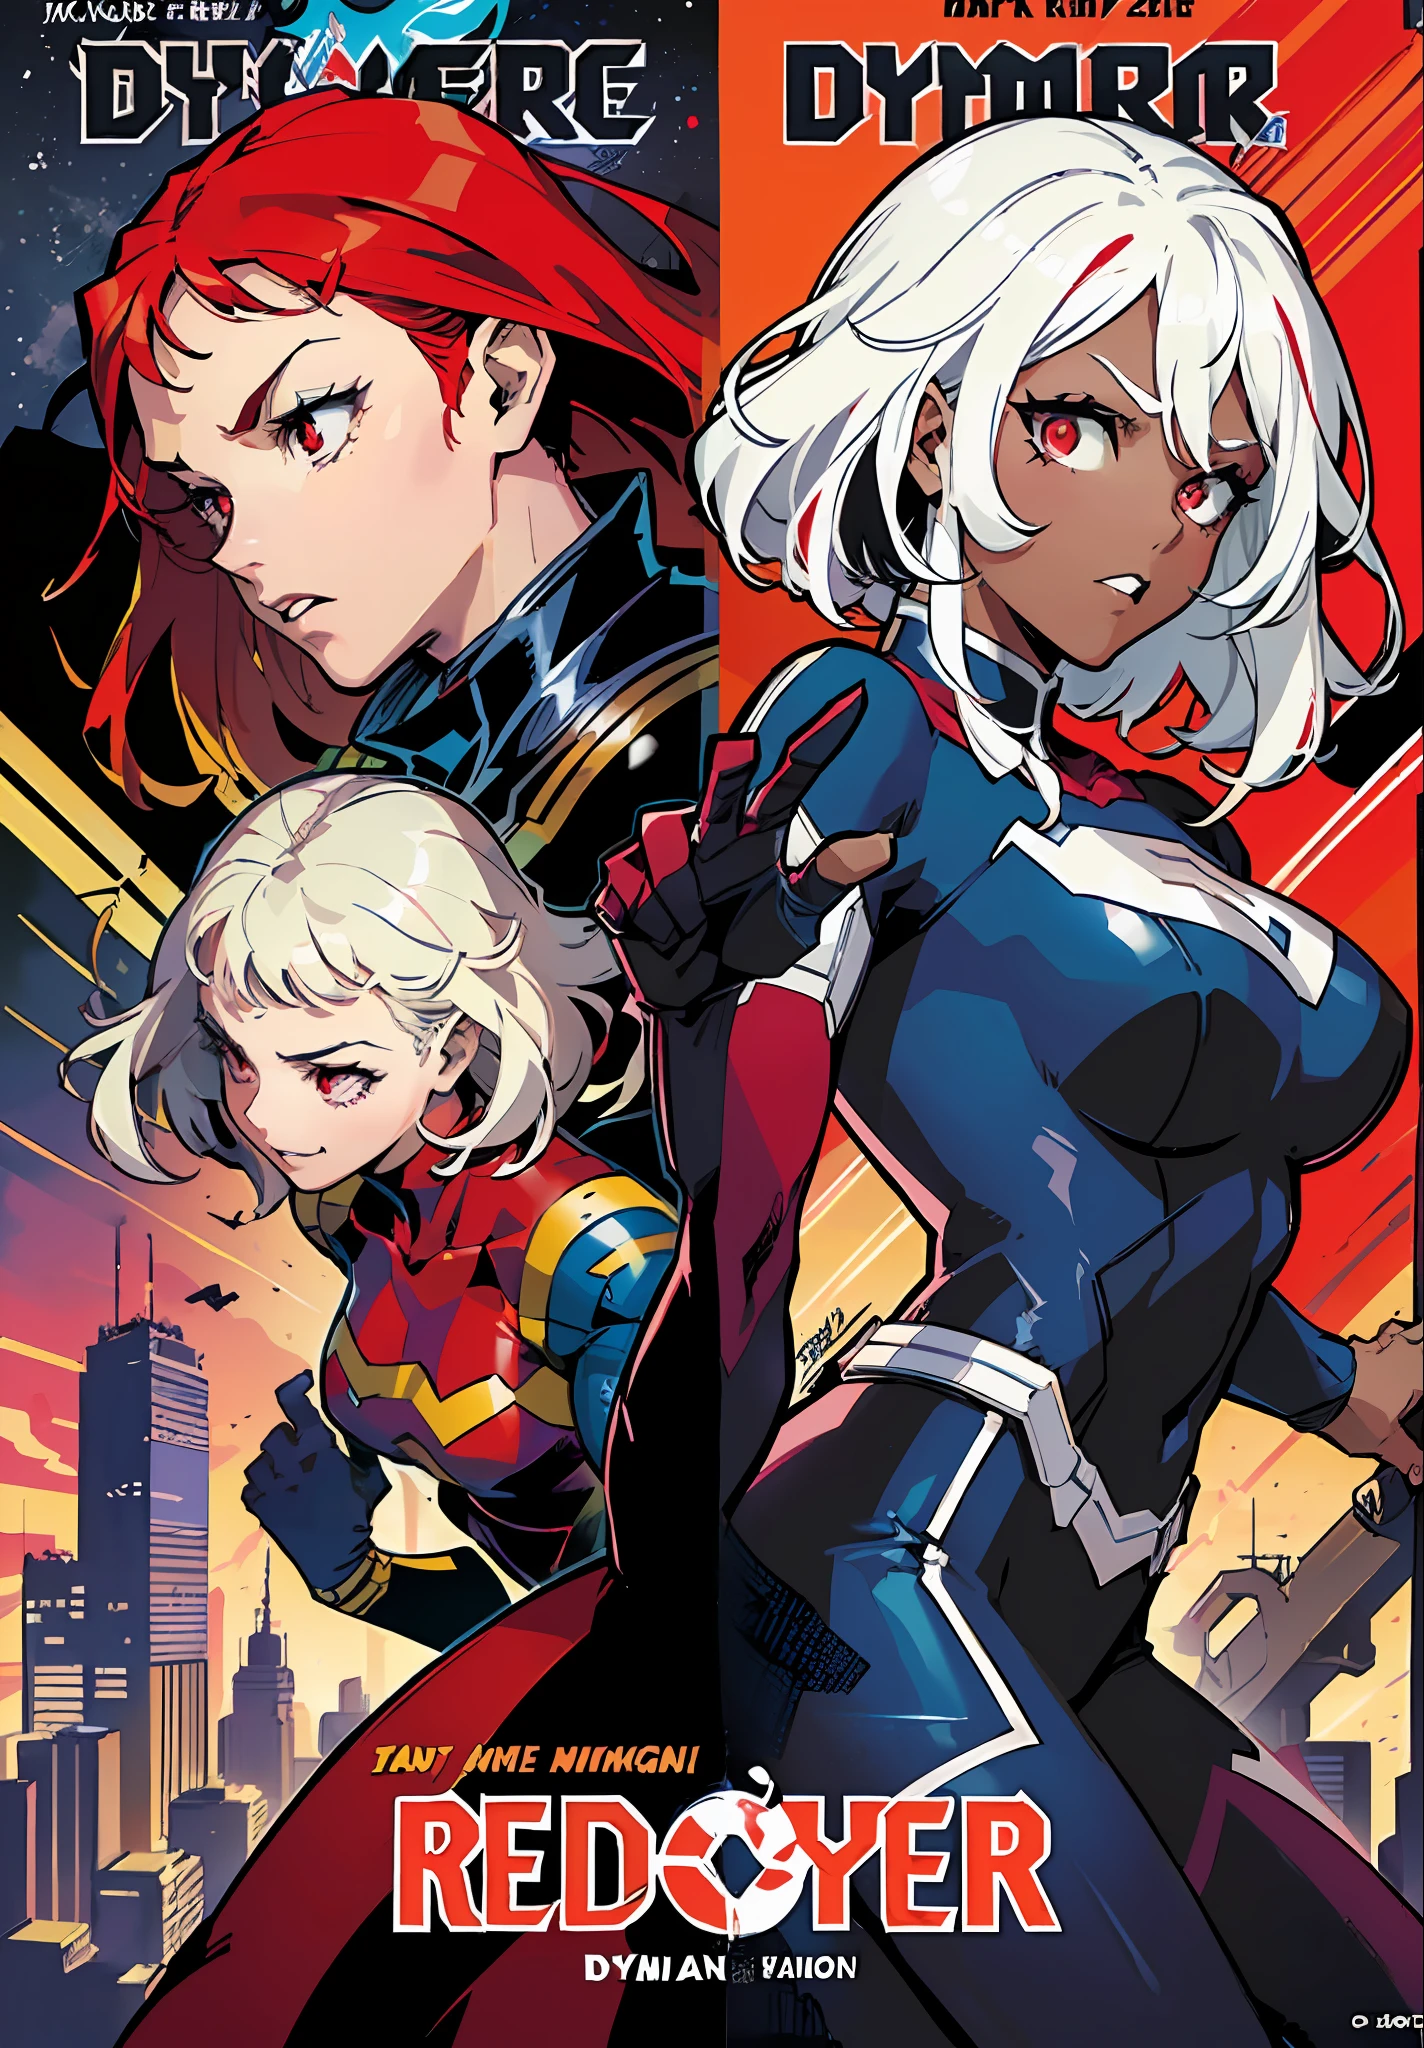 ((epic pose)), ((dynamicpose)), 1girl, ((Movie poster)), (((black skin))), (((dark skin)))), (((white colored hair|red hair))), ((multicolour hair)), ((Short hair)), (((red eyes)))(superhero suit), night time, City, neon light, the wind, ((magazine cover)), ((comic cover)), ((manga cover)), big text, big title, many inscriptions, lettering